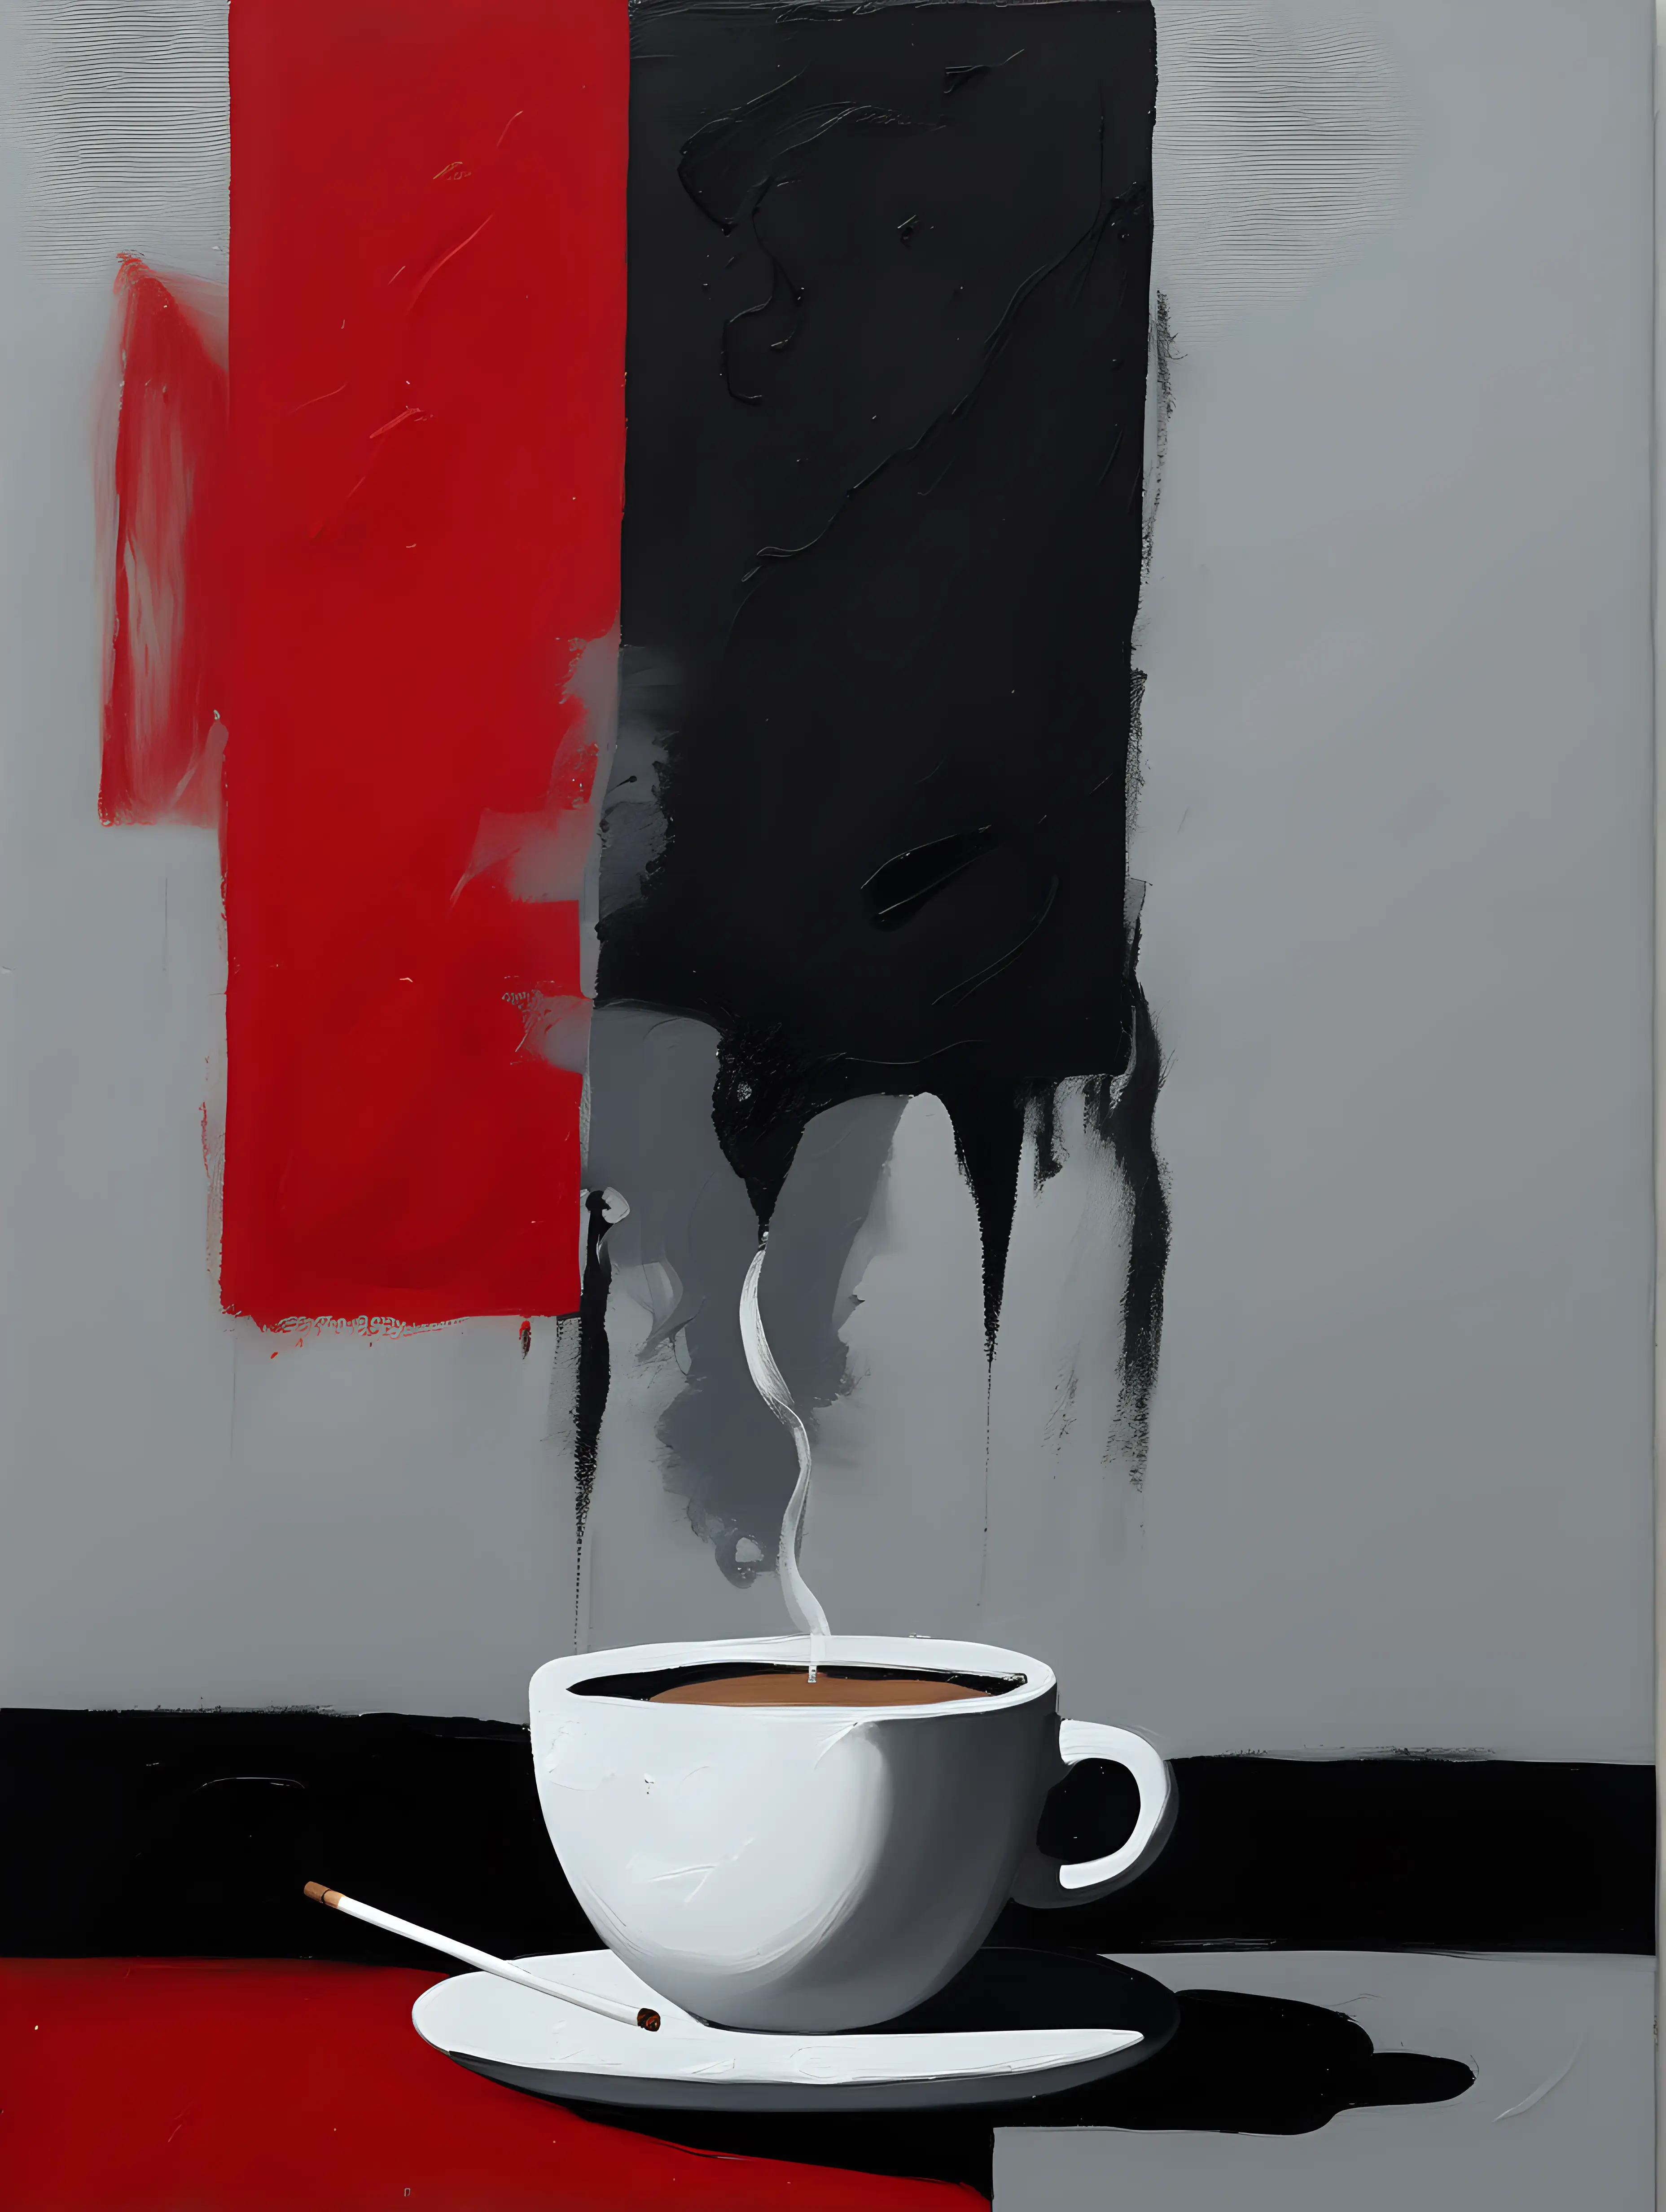 Minimalist Abstract Painting with Red Black and Gray Palette featuring Coffee and Cigarette